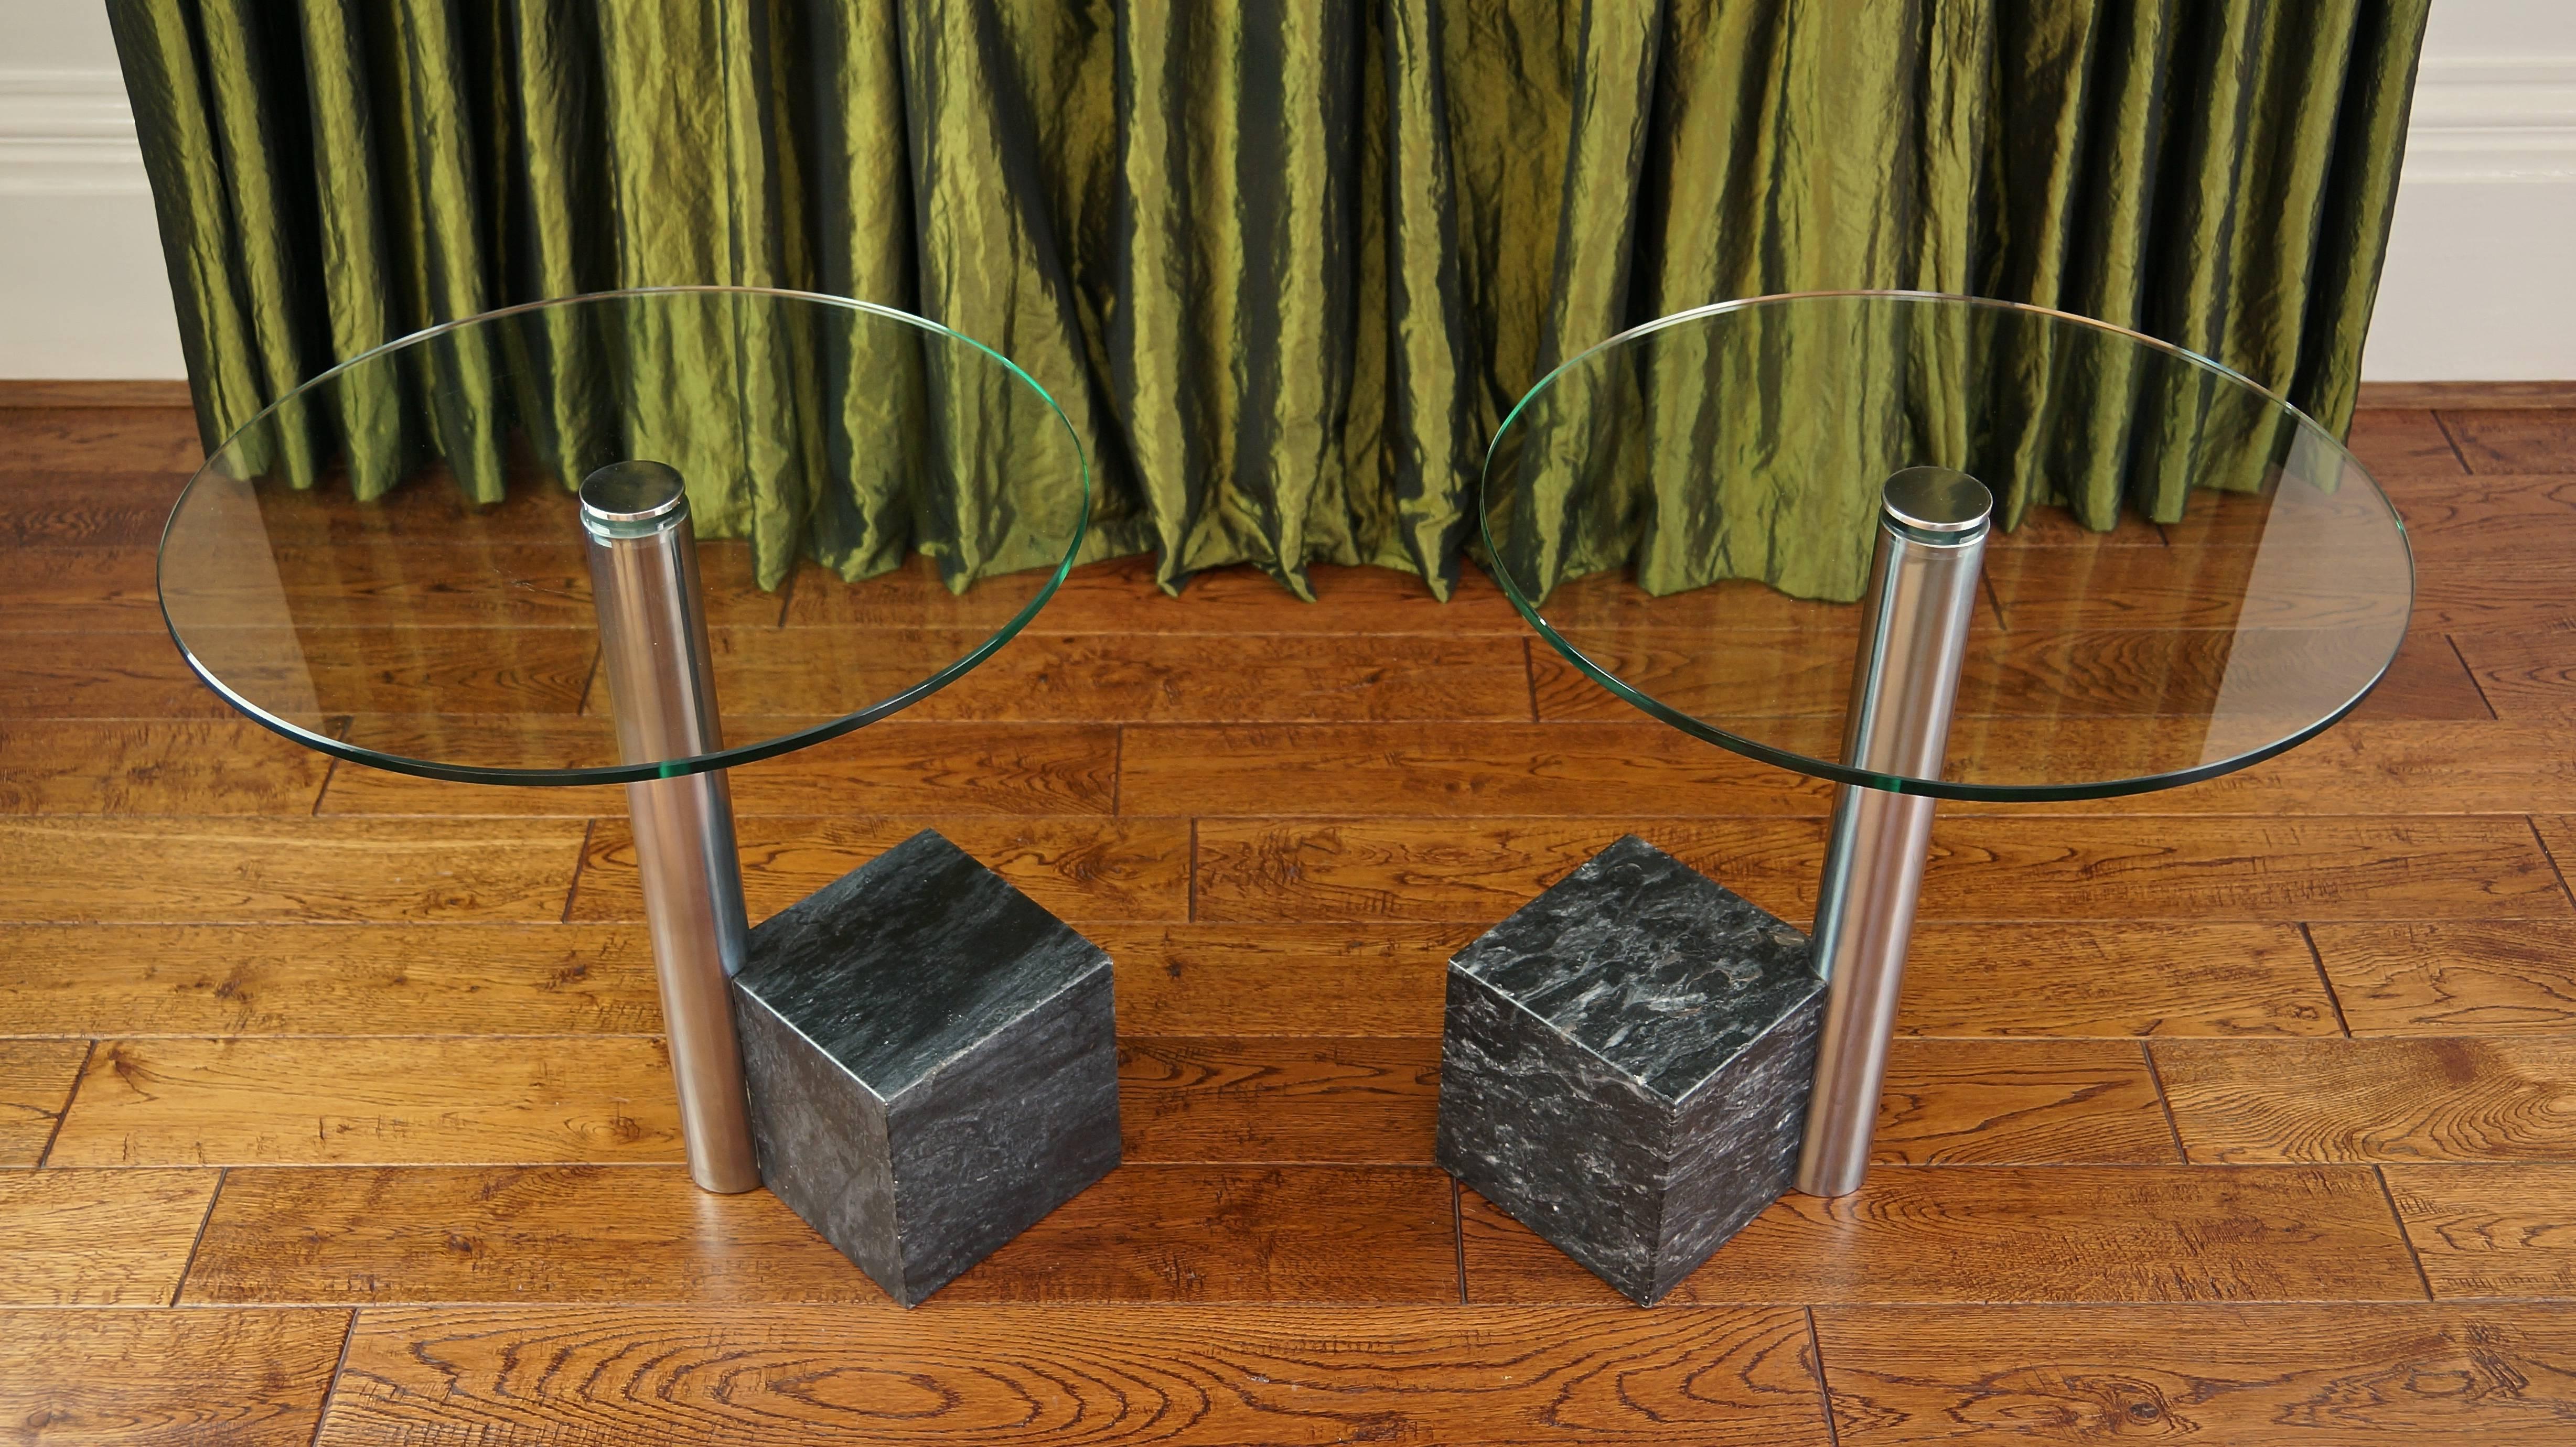 Steel Pair of Vintage Marble and Glass HK2 Side Tables by Hank Kwint, Metaform 1980s For Sale